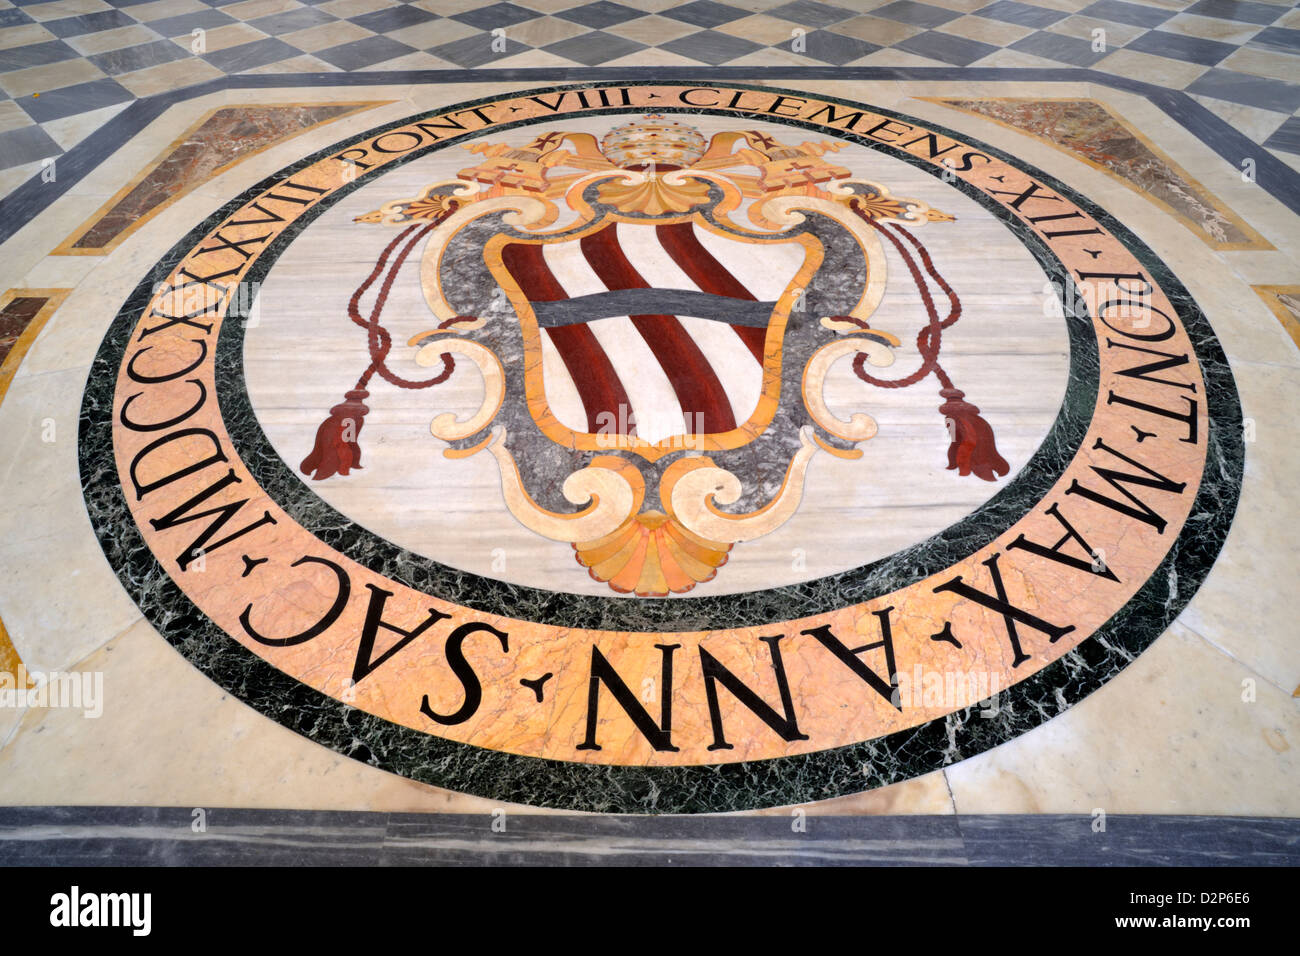 italy, rome, basilica of san giovanni in laterano, entrance, papal coat of arms on the floor Stock Photo